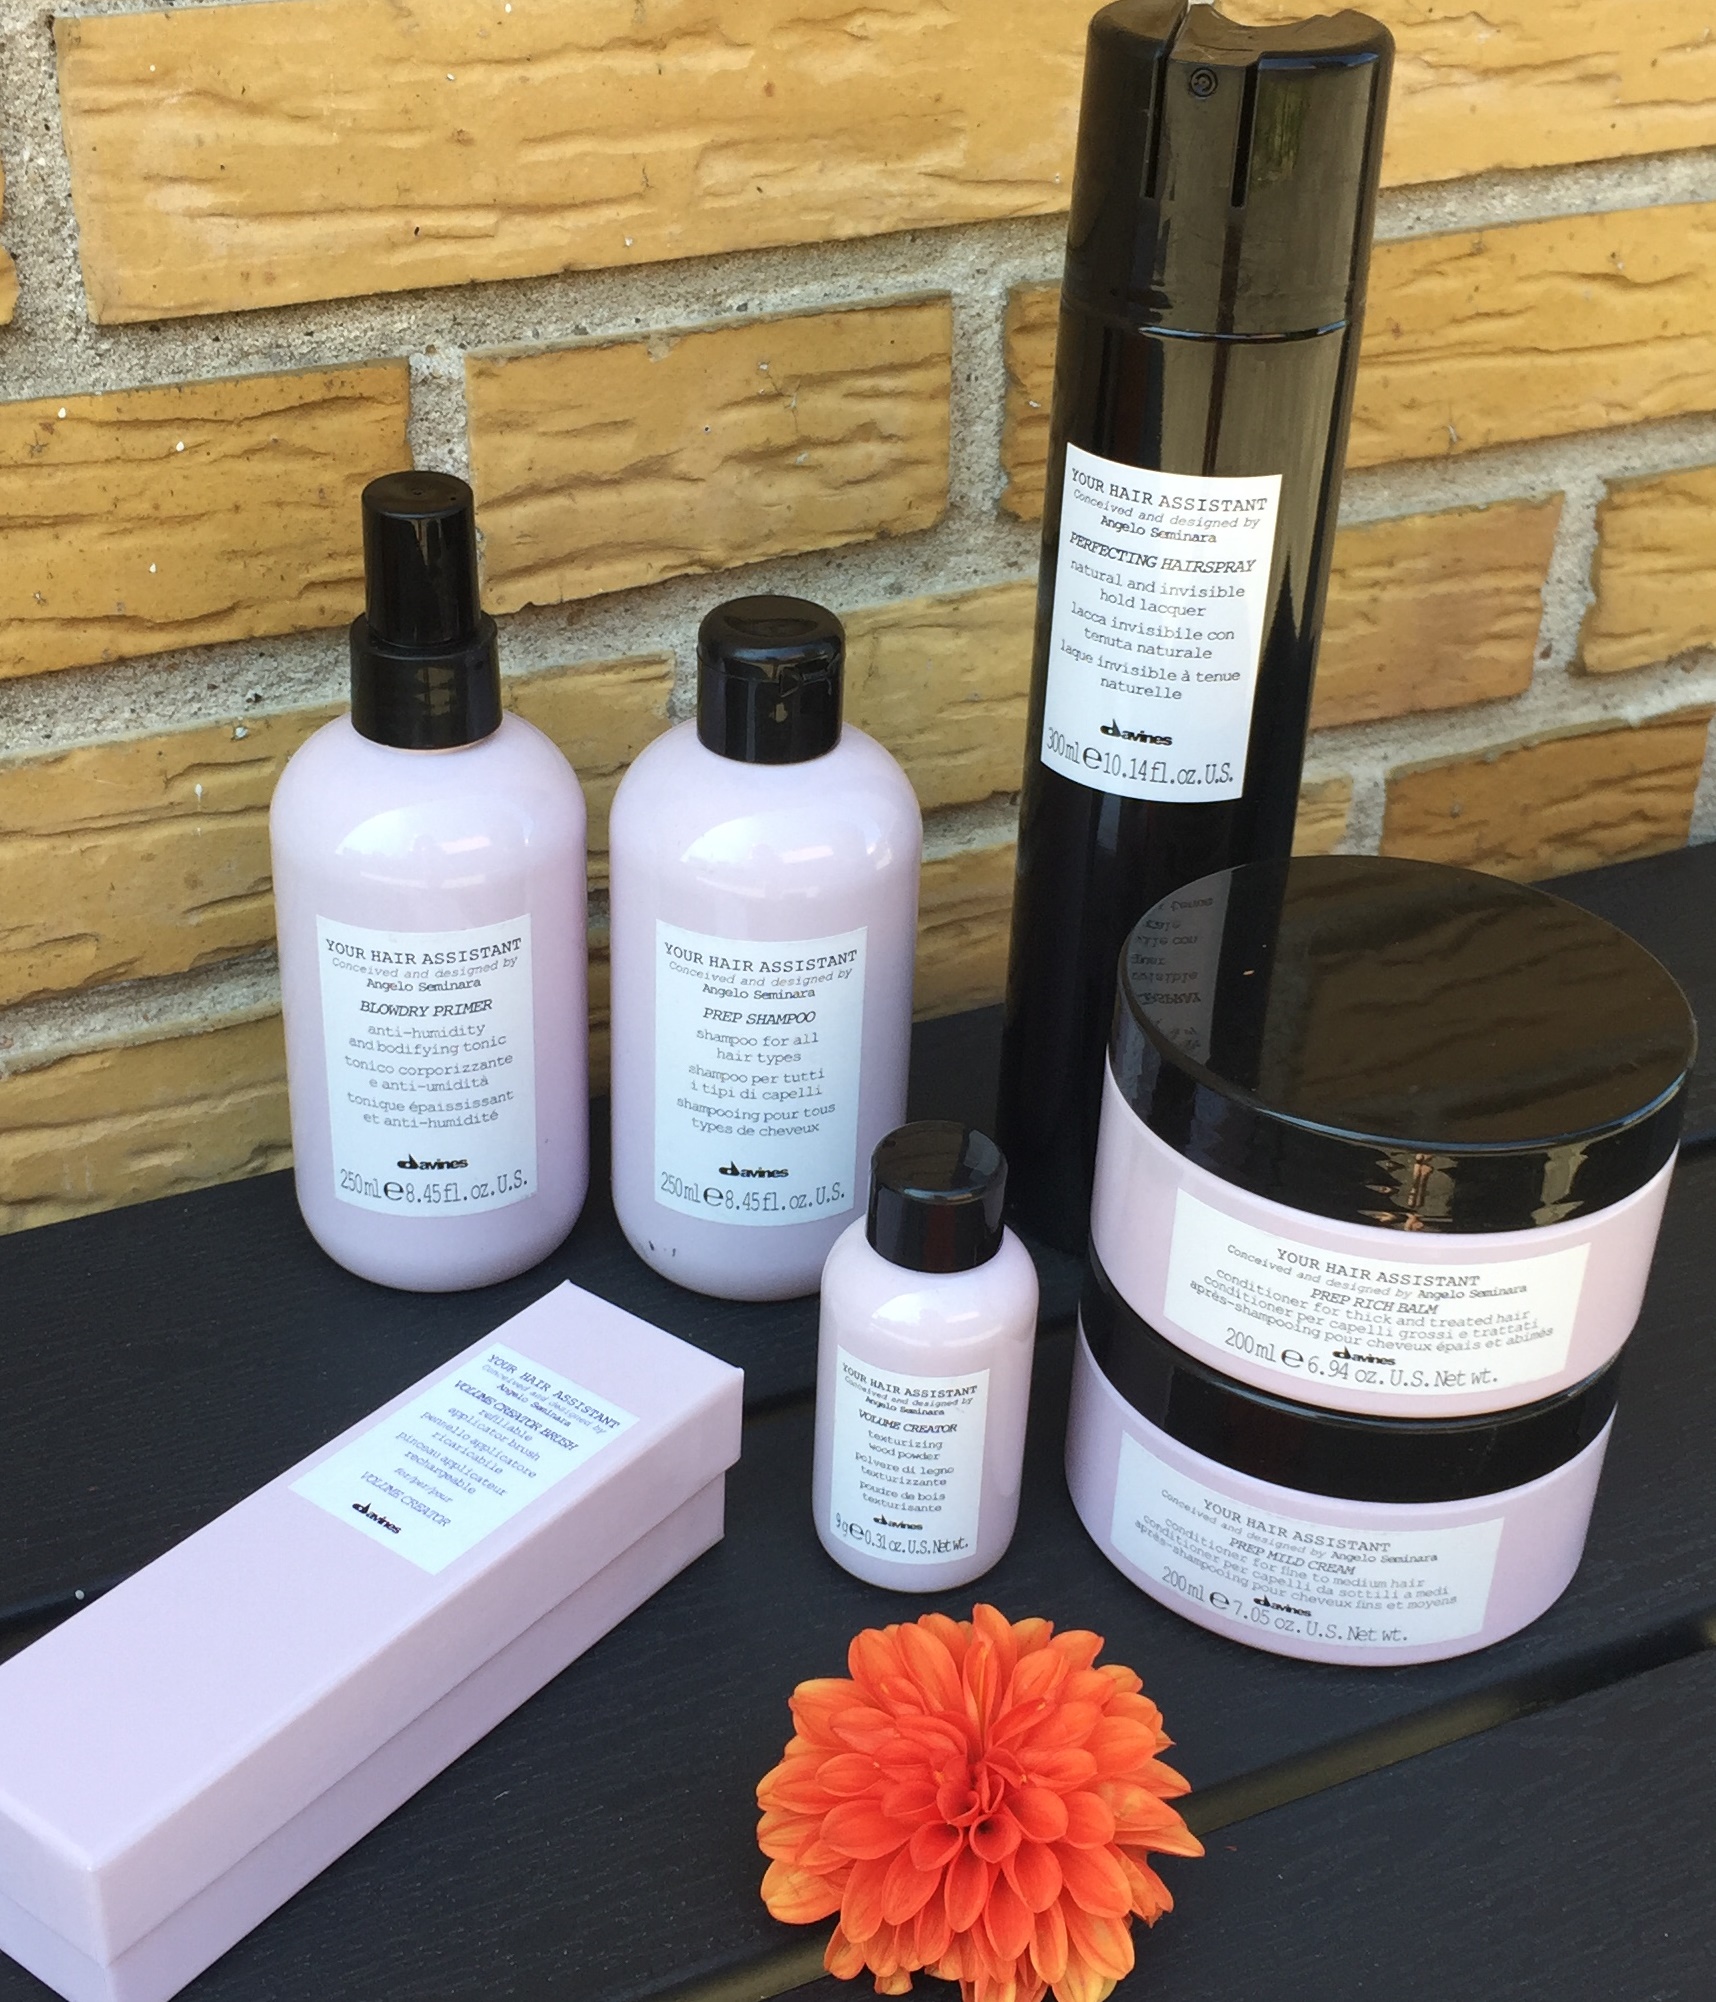 Davines, Anmeldelse, Davines Your Hair Assistant, Your Hair Assistant, 